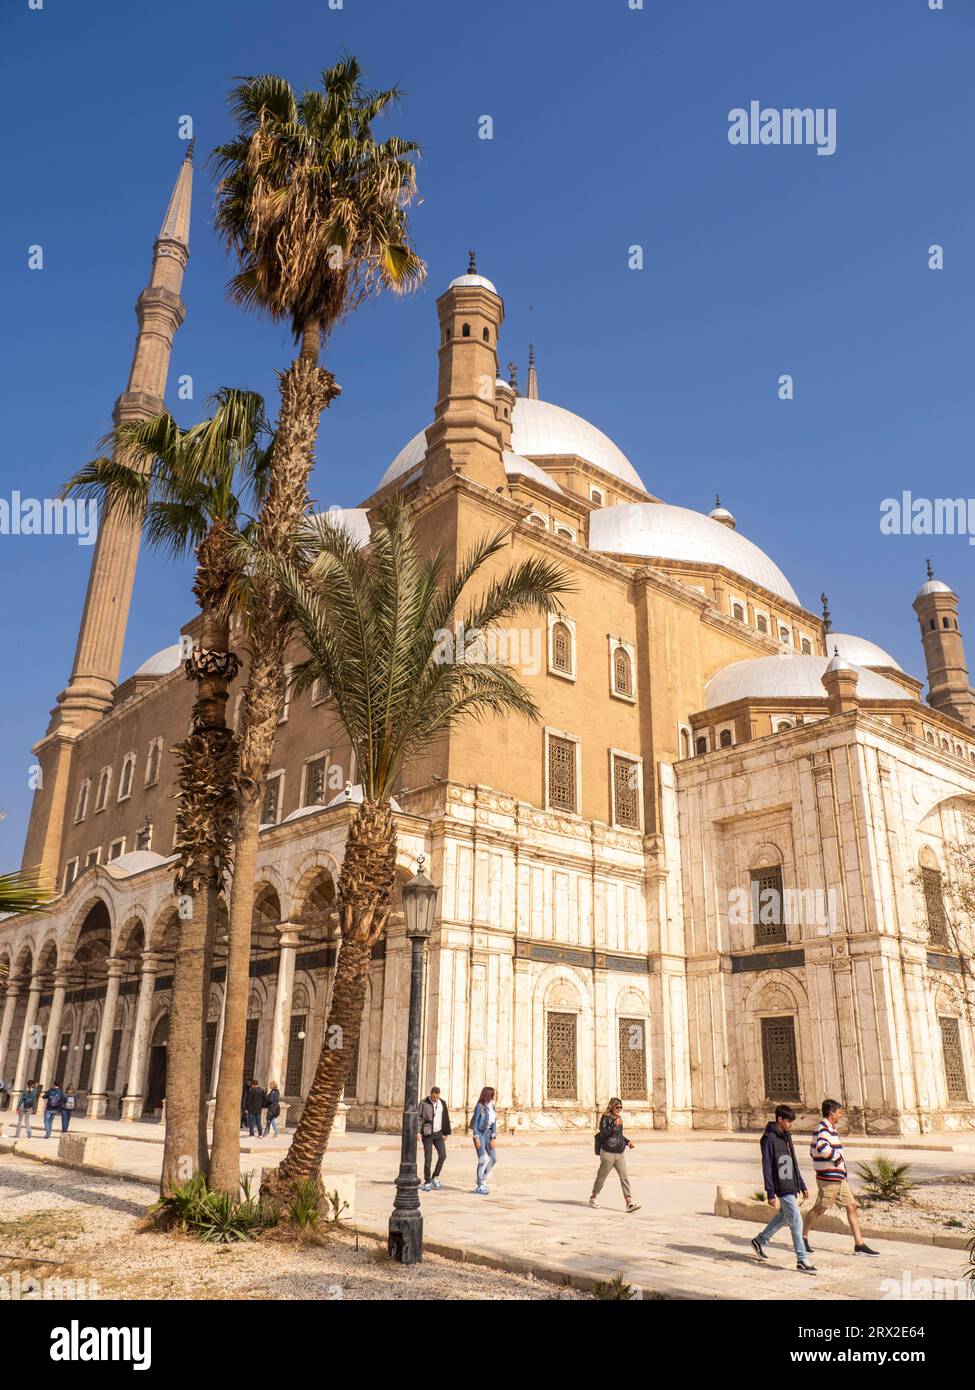 The Ottoman-era Muhammad Ali Mosque, completed in 1848, overlooking Cairo from atop the Citadel, Cairo, Egypt, North Africa, Africa Stock Photo